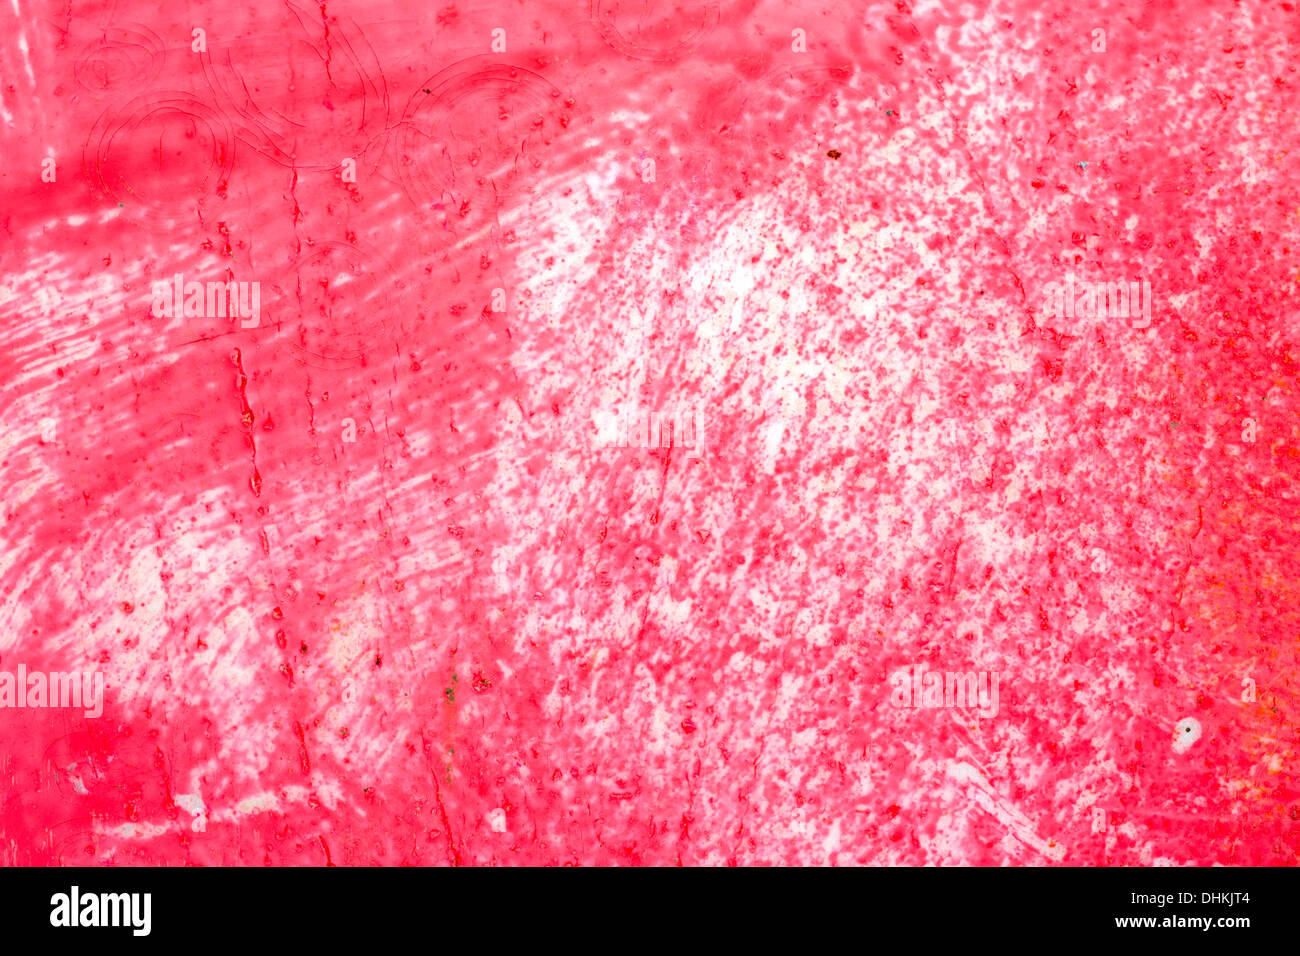 Close view of a surface covered with worn red paint. Stock Photo